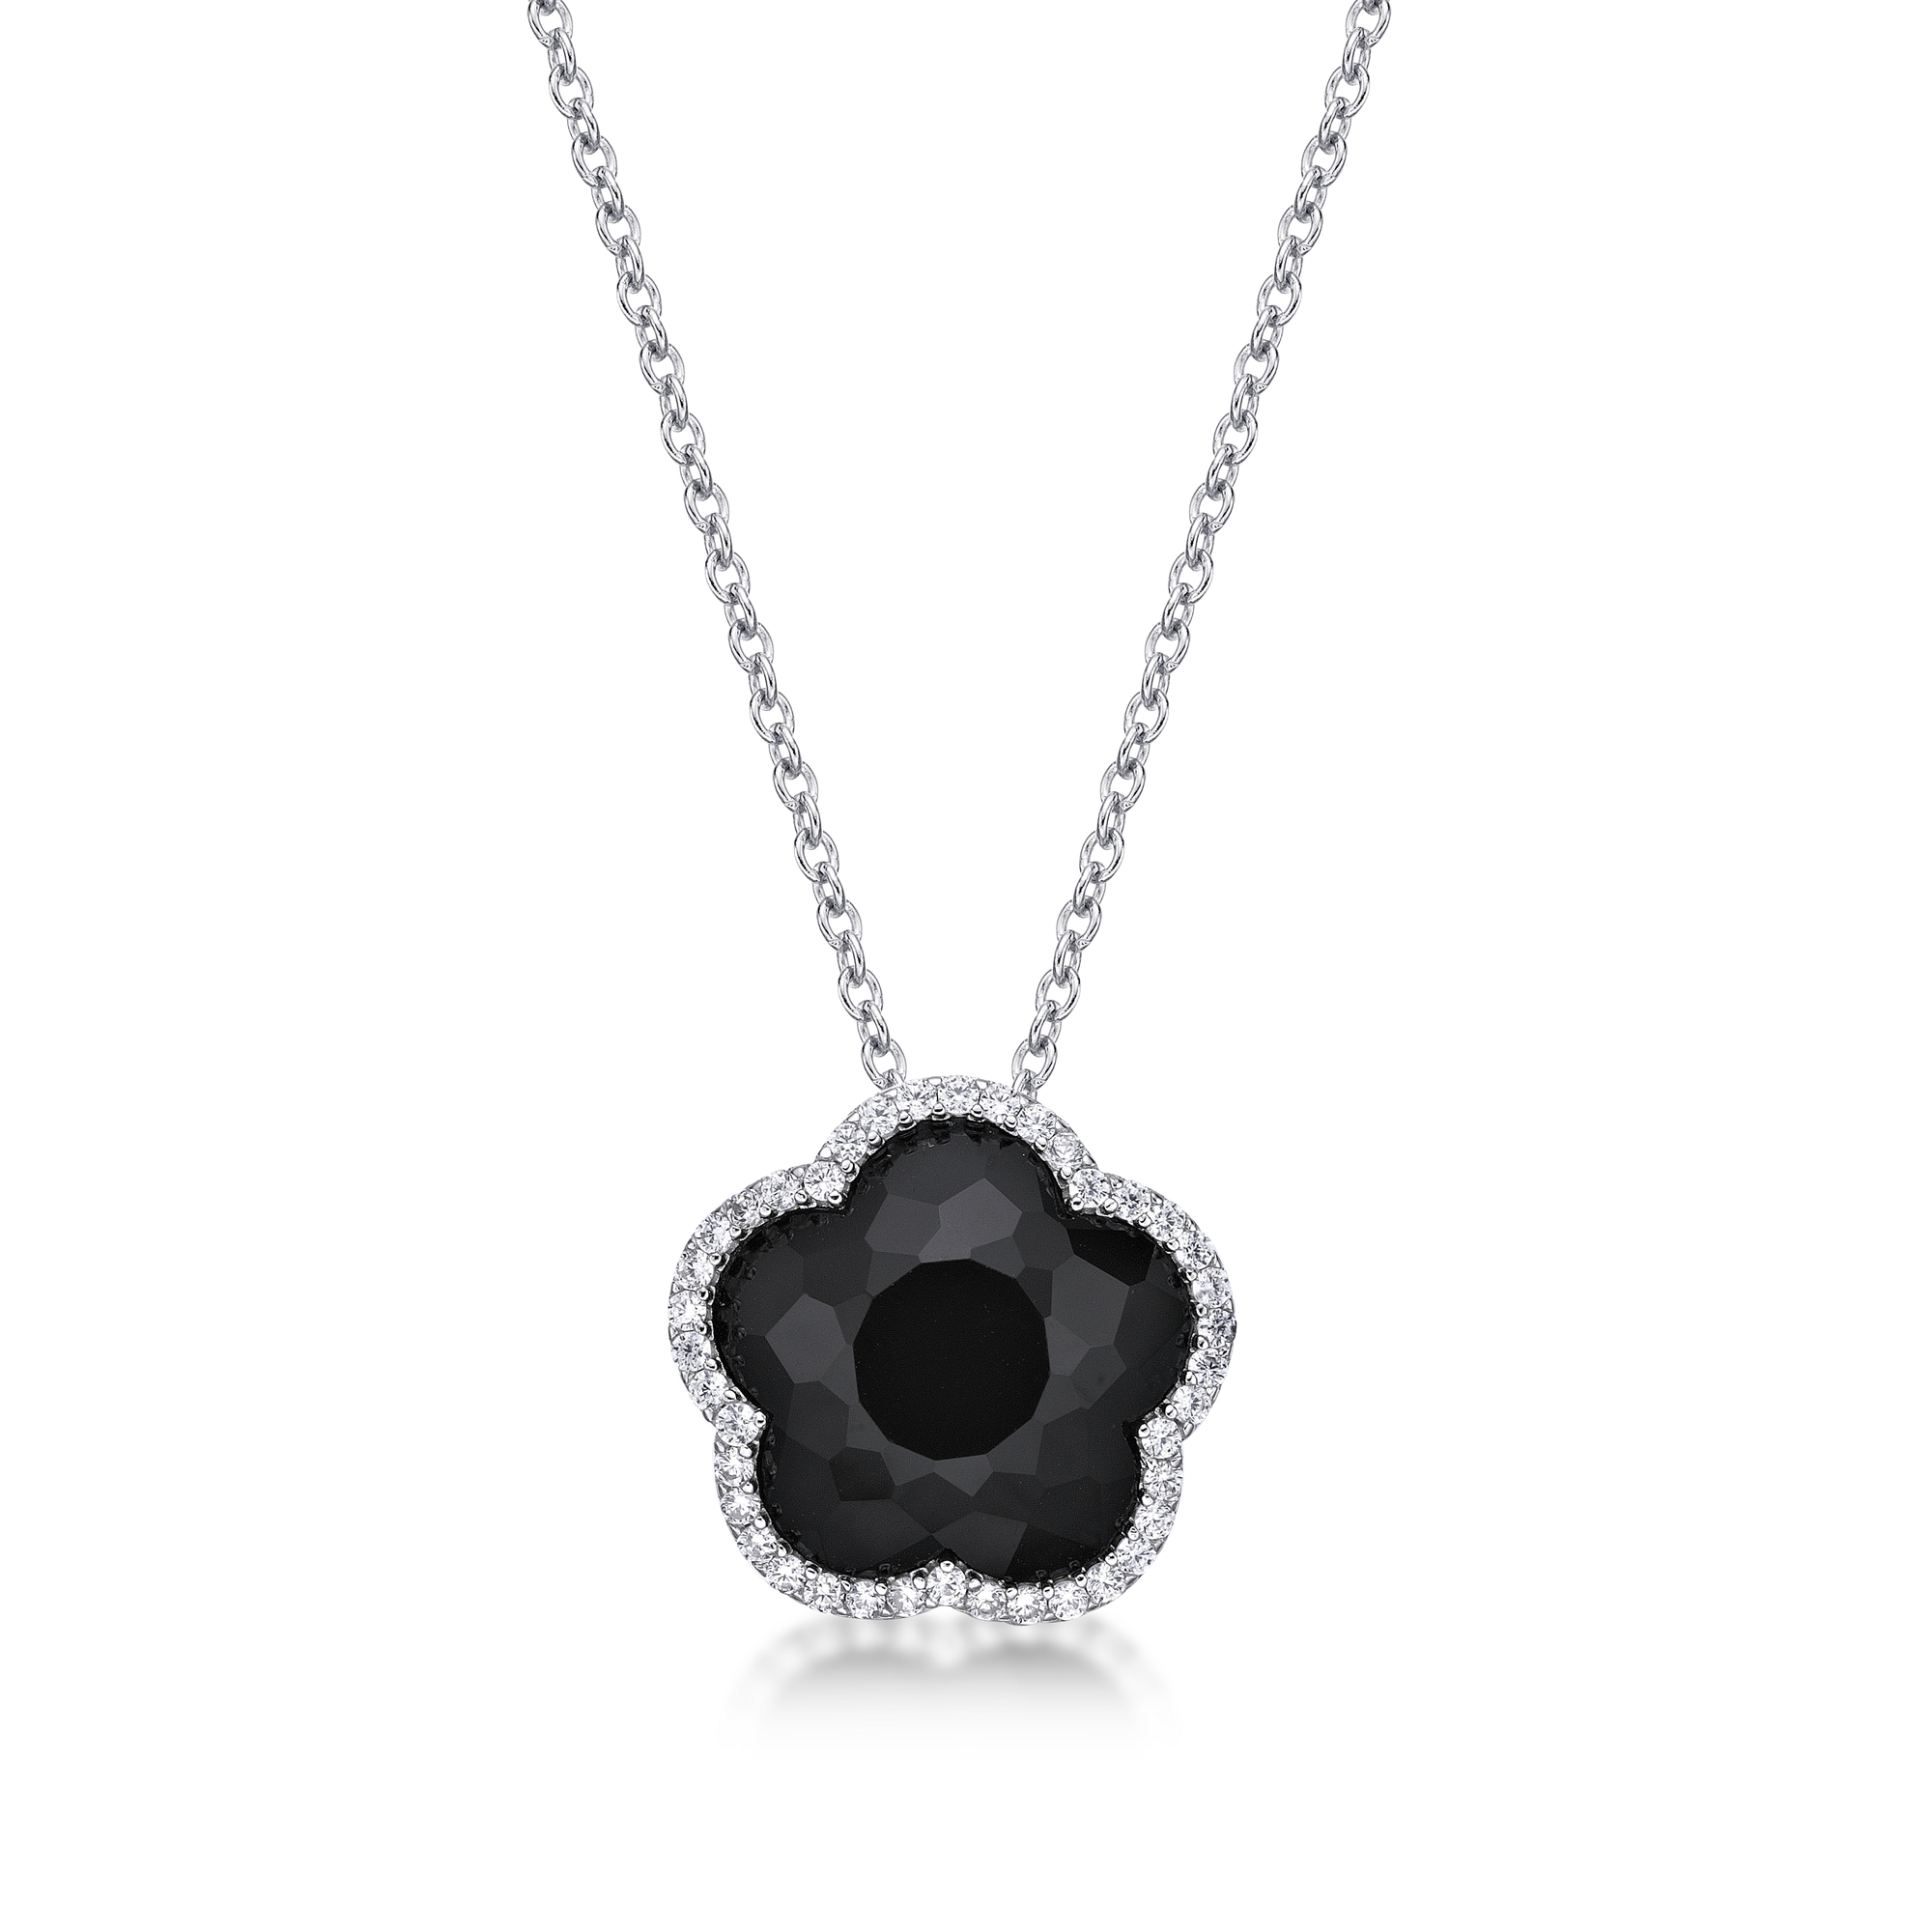 Women's Black Onyx Flower Pendant Necklace in 925 Sterling Silver with Cubic Zirconia Halo - 18 Inch Adjustable Cable Chain - Flora | Lavari Jewelers